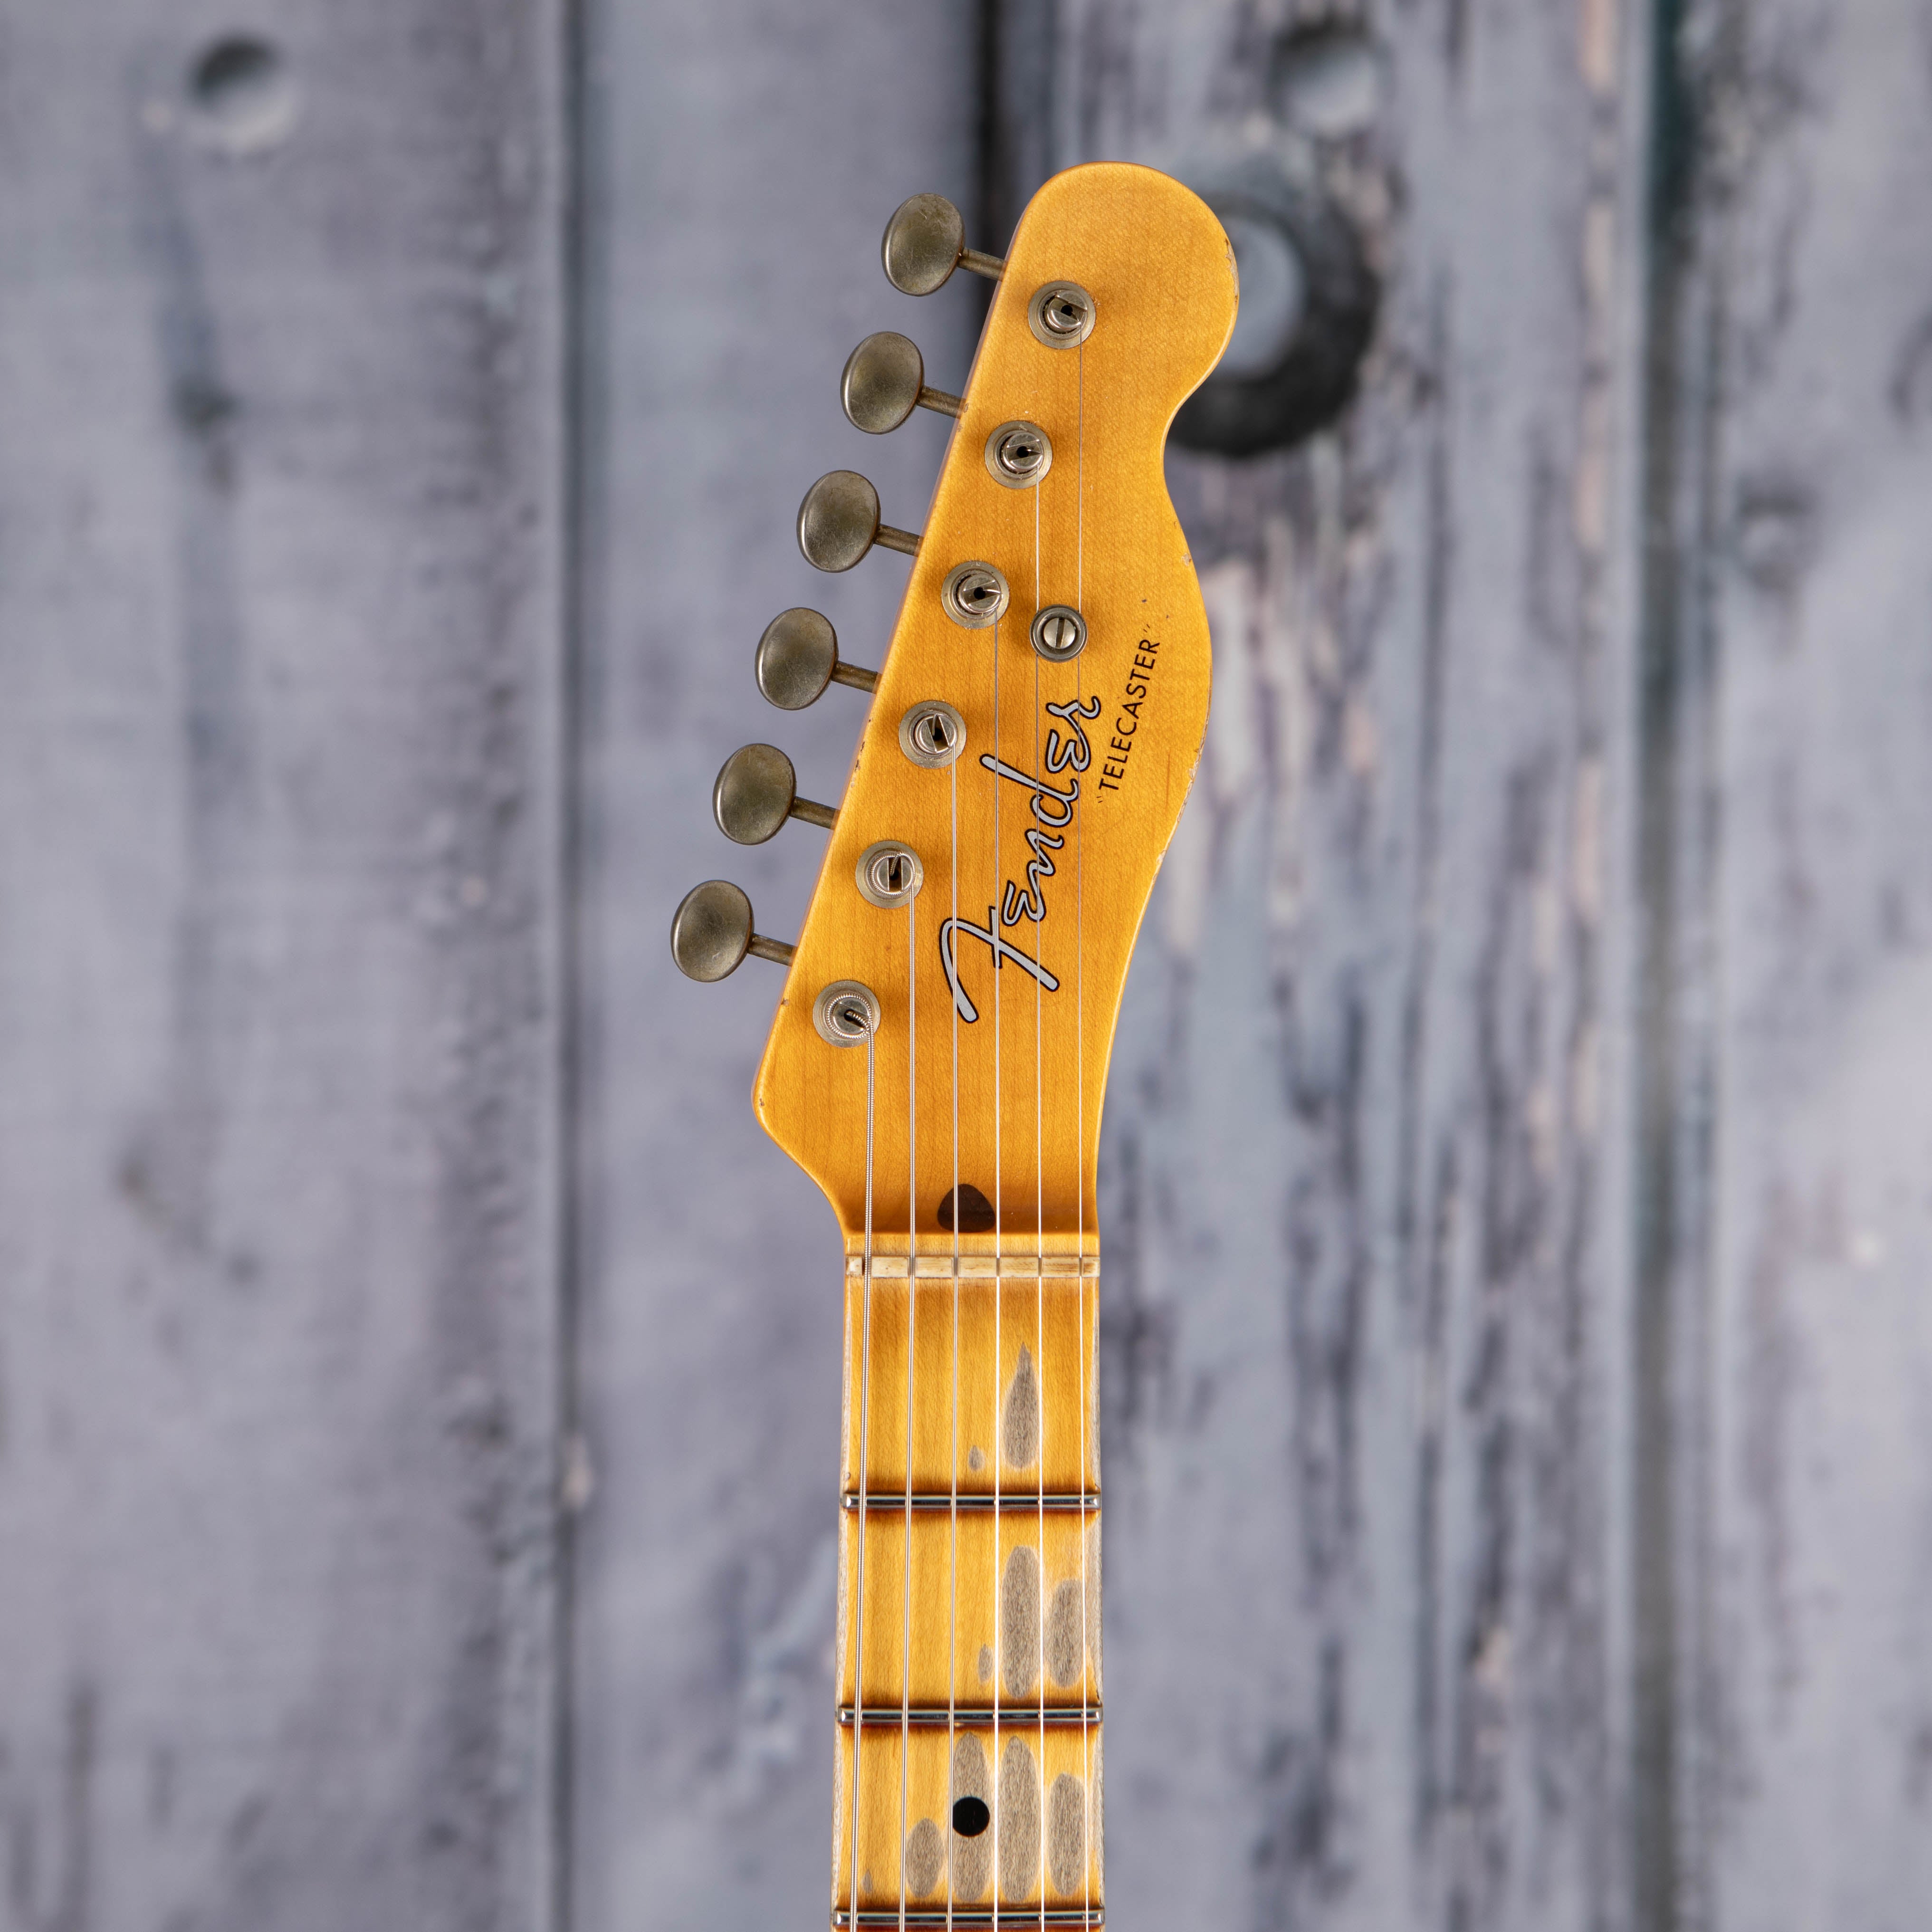 Fender Custom Shop Limited Tomatillo BG Telecaster Relic Electric Guitar, Aged Nocaster Blonde, front headstock